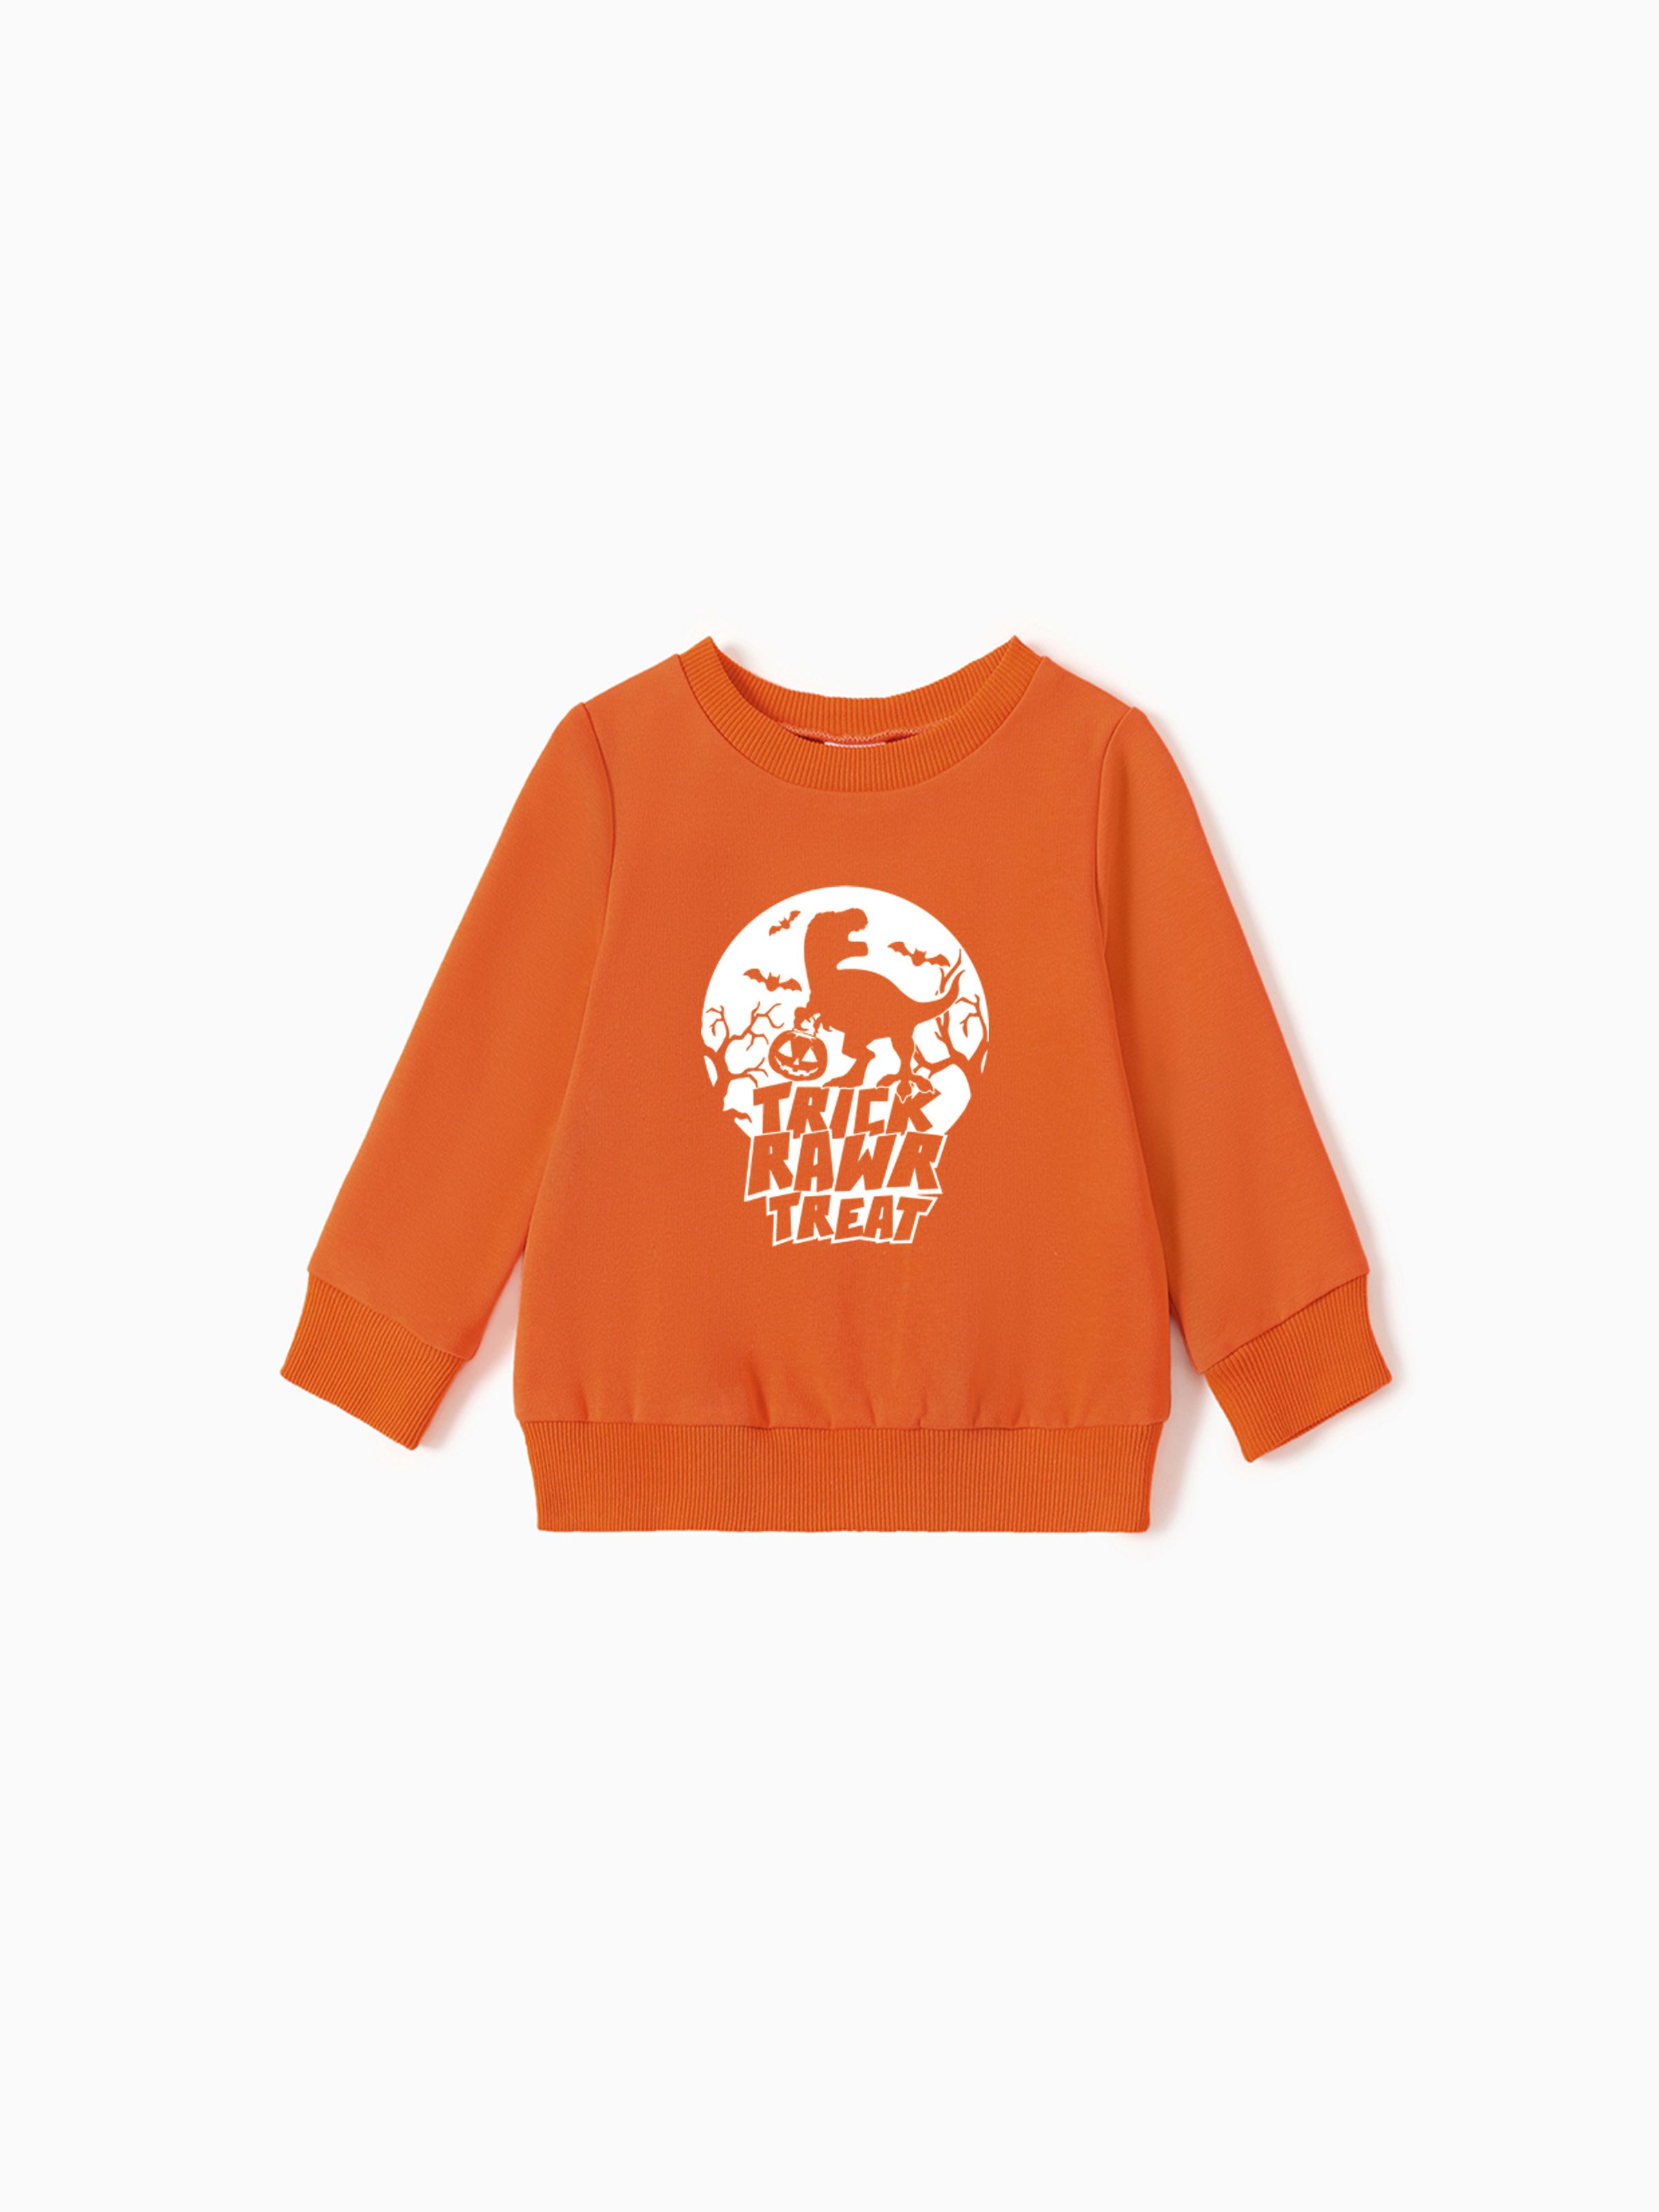 

Halloween Family Matching Spooky Dinosaur Graphic Trick or Treat Tops